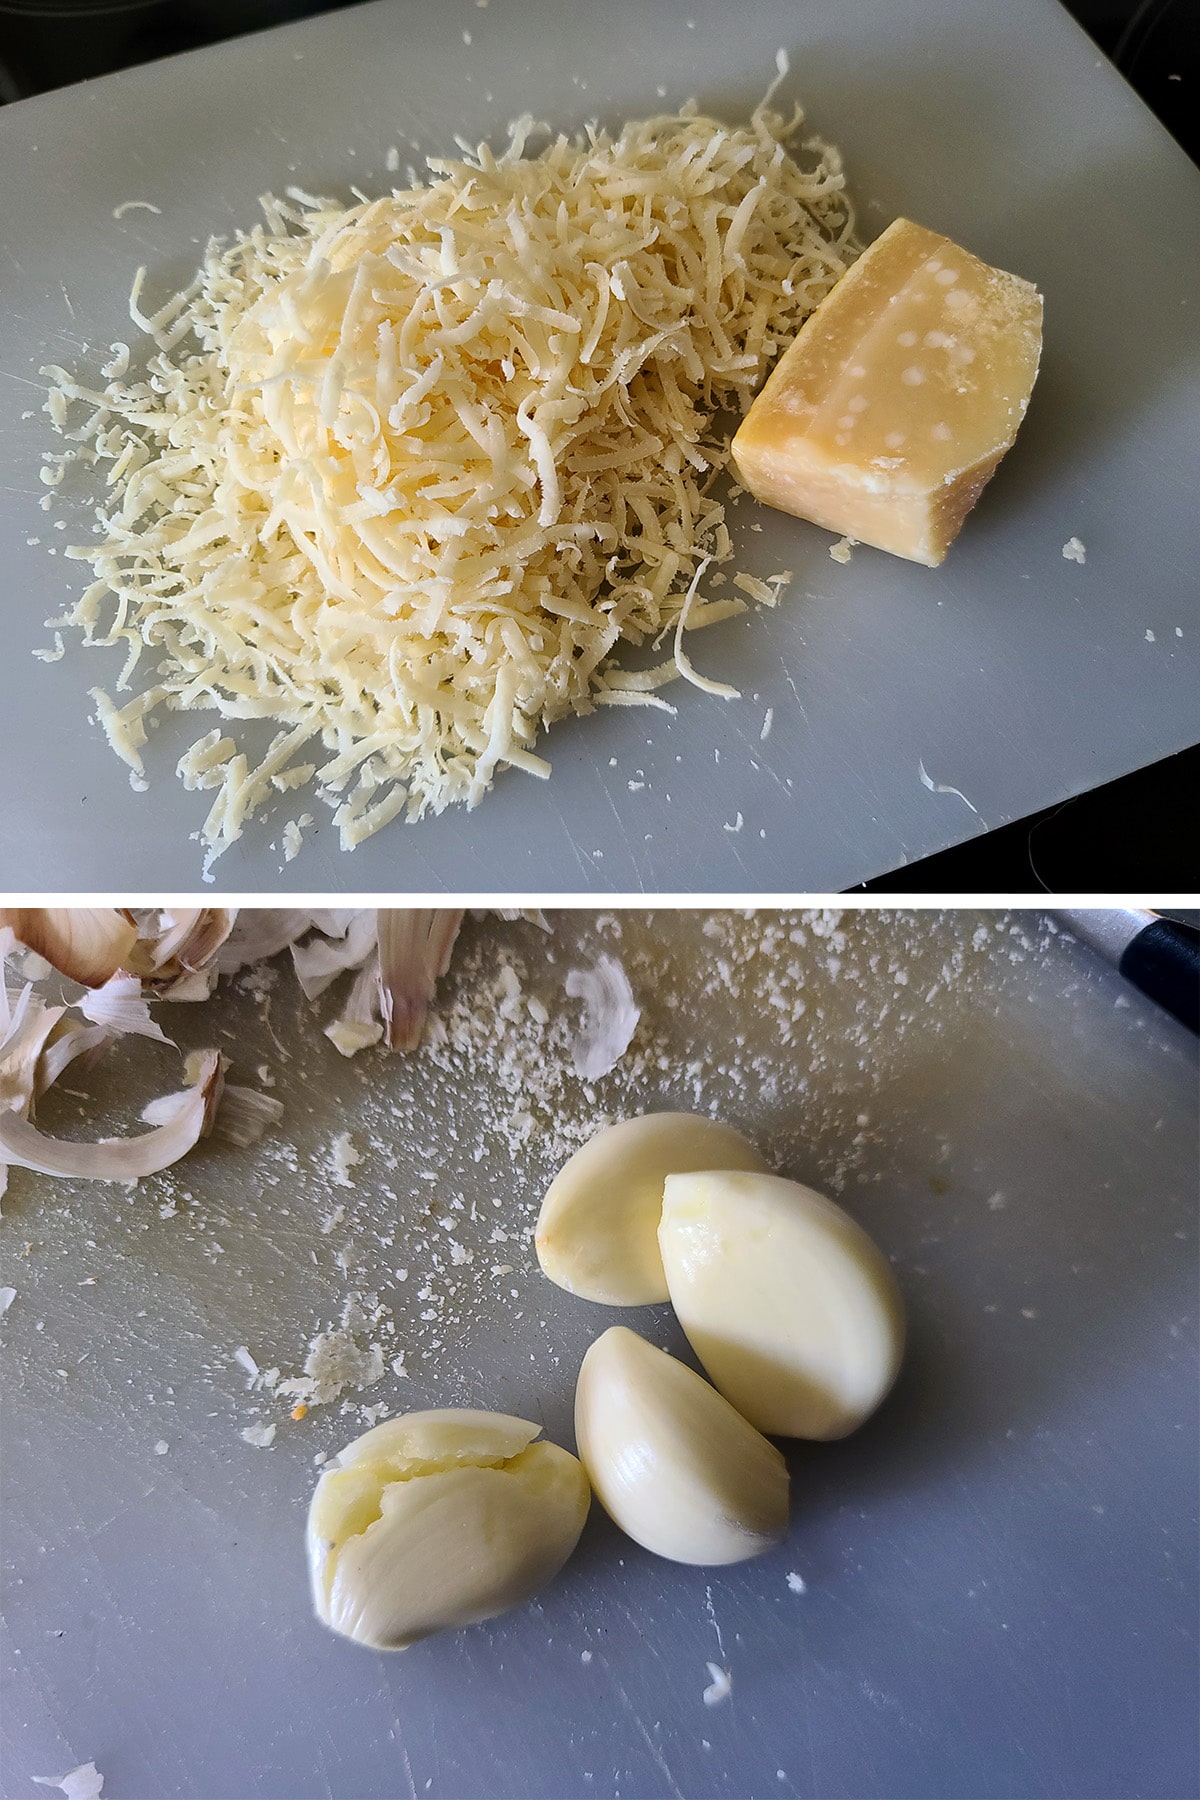 Shredded Parmesan cheese and several garlic cloves on a cutting board.